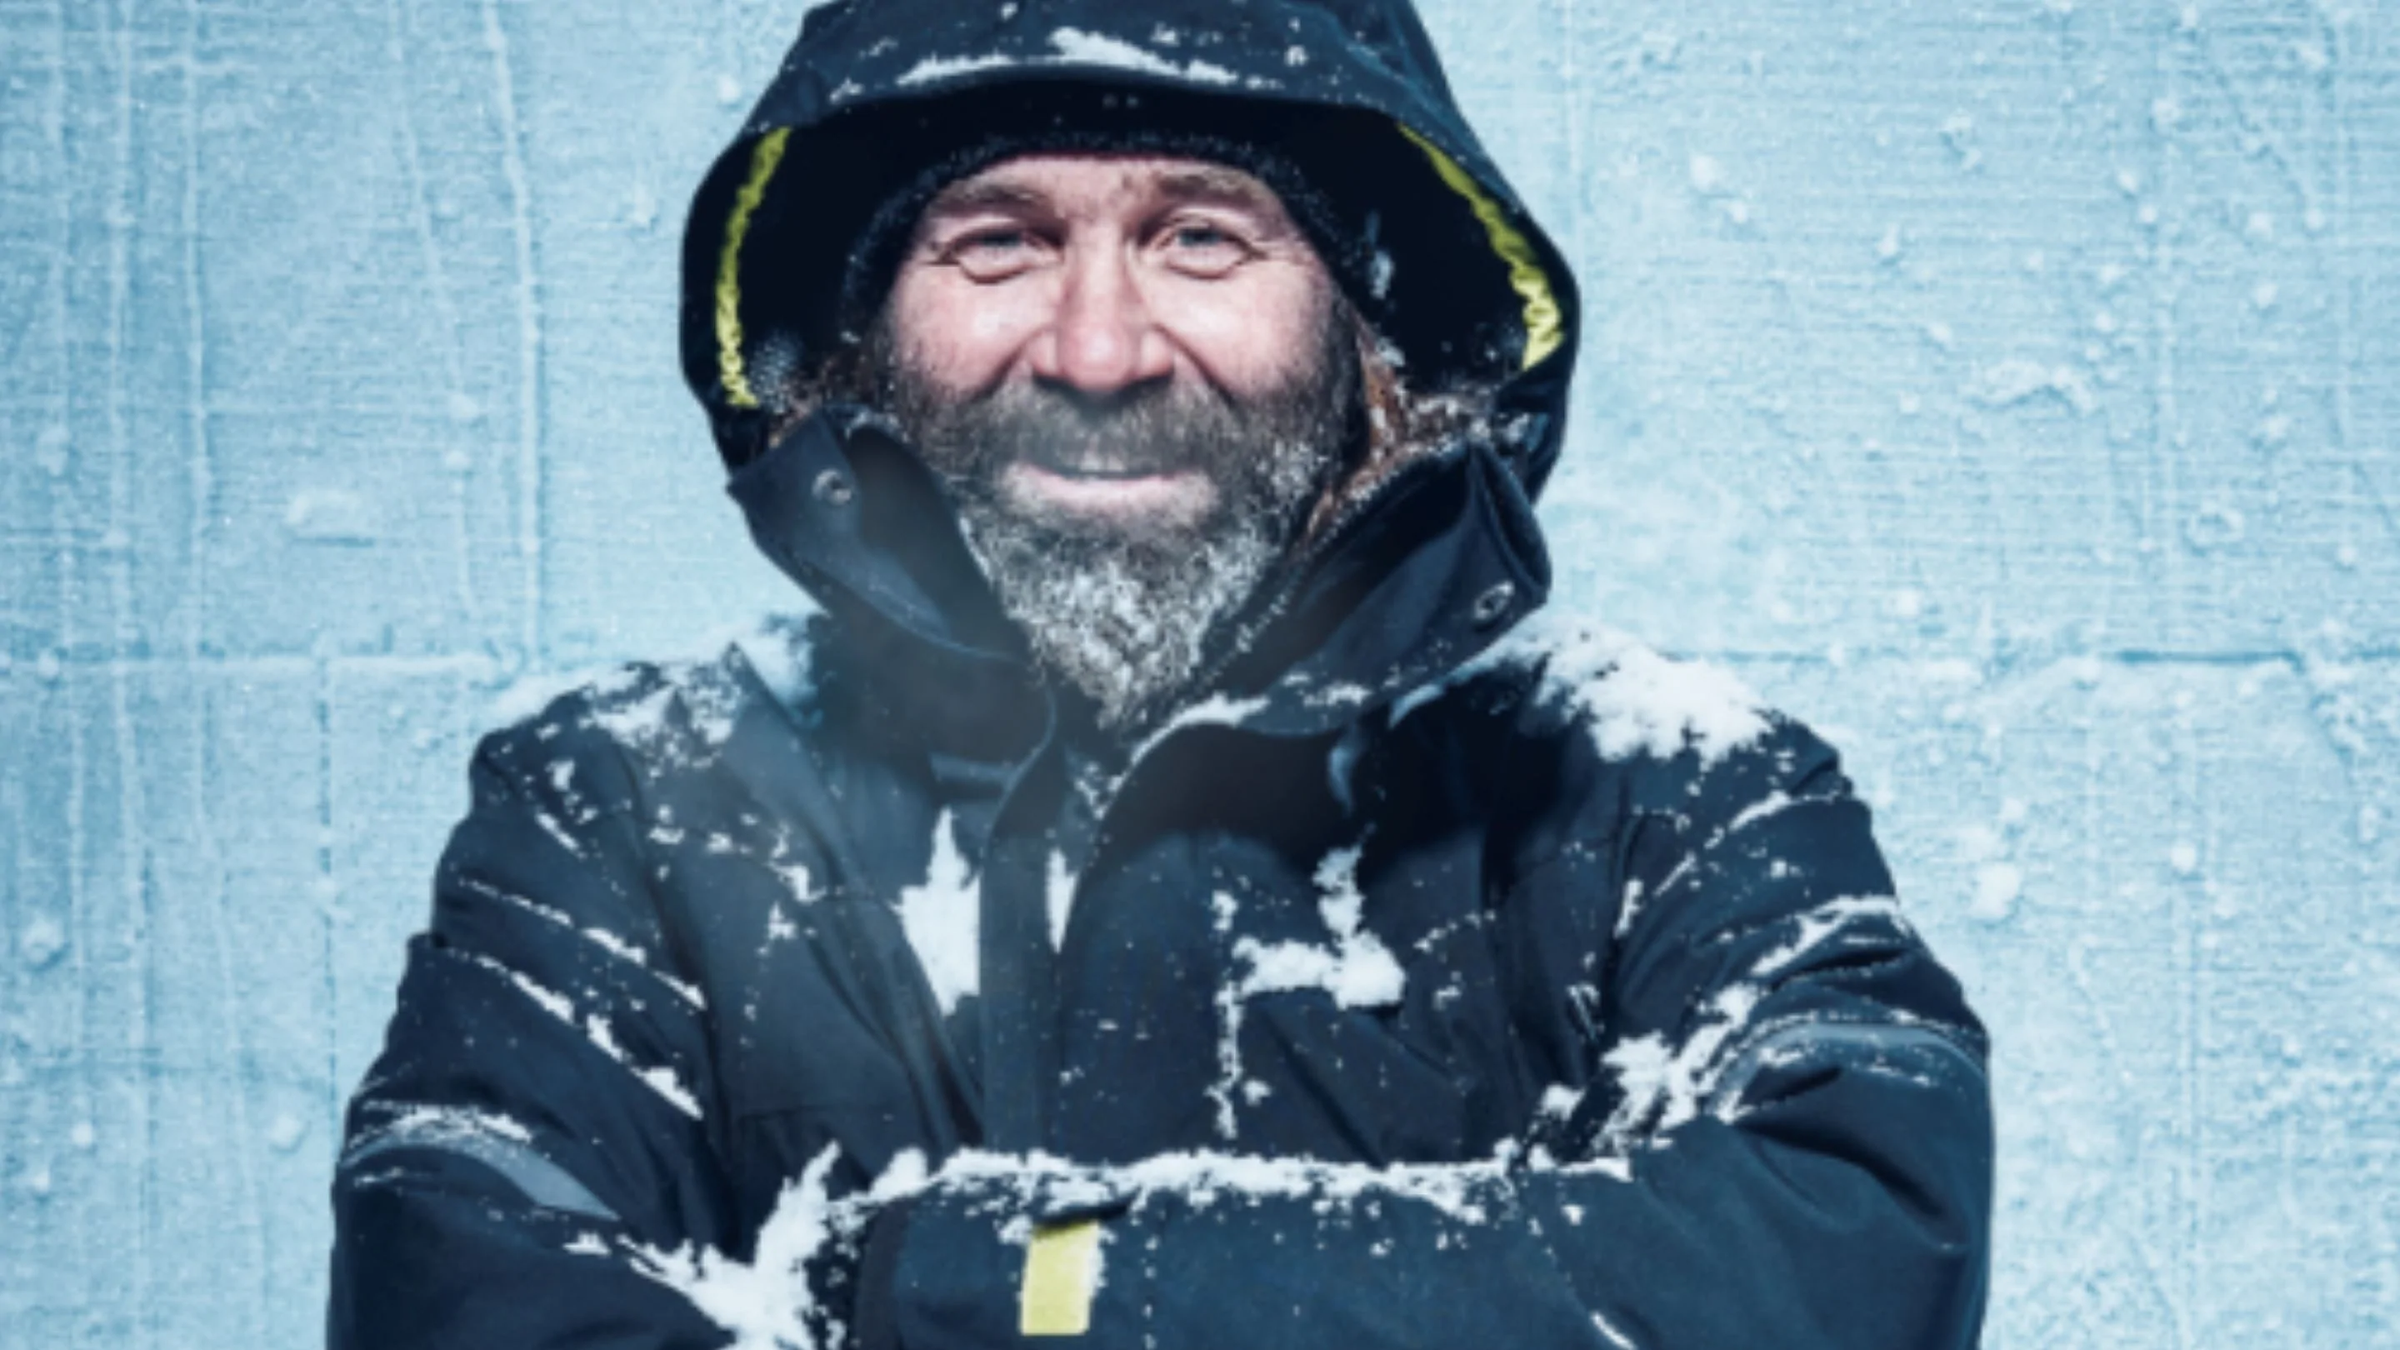 An image of the Helly Hansen Parka Jacket being worn